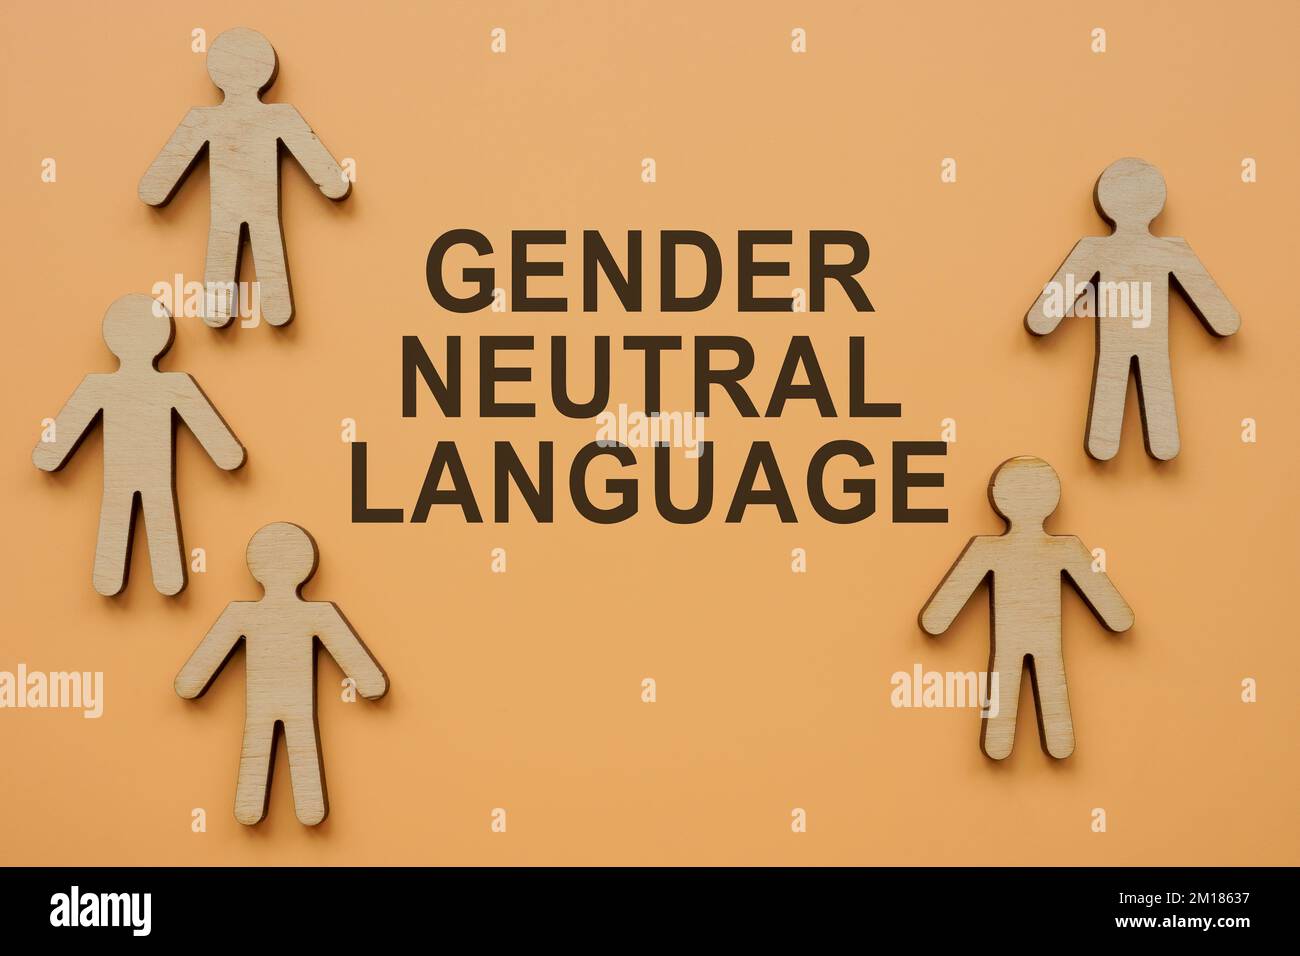 Wooden figurines and inscription gender neutral language. Stock Photo